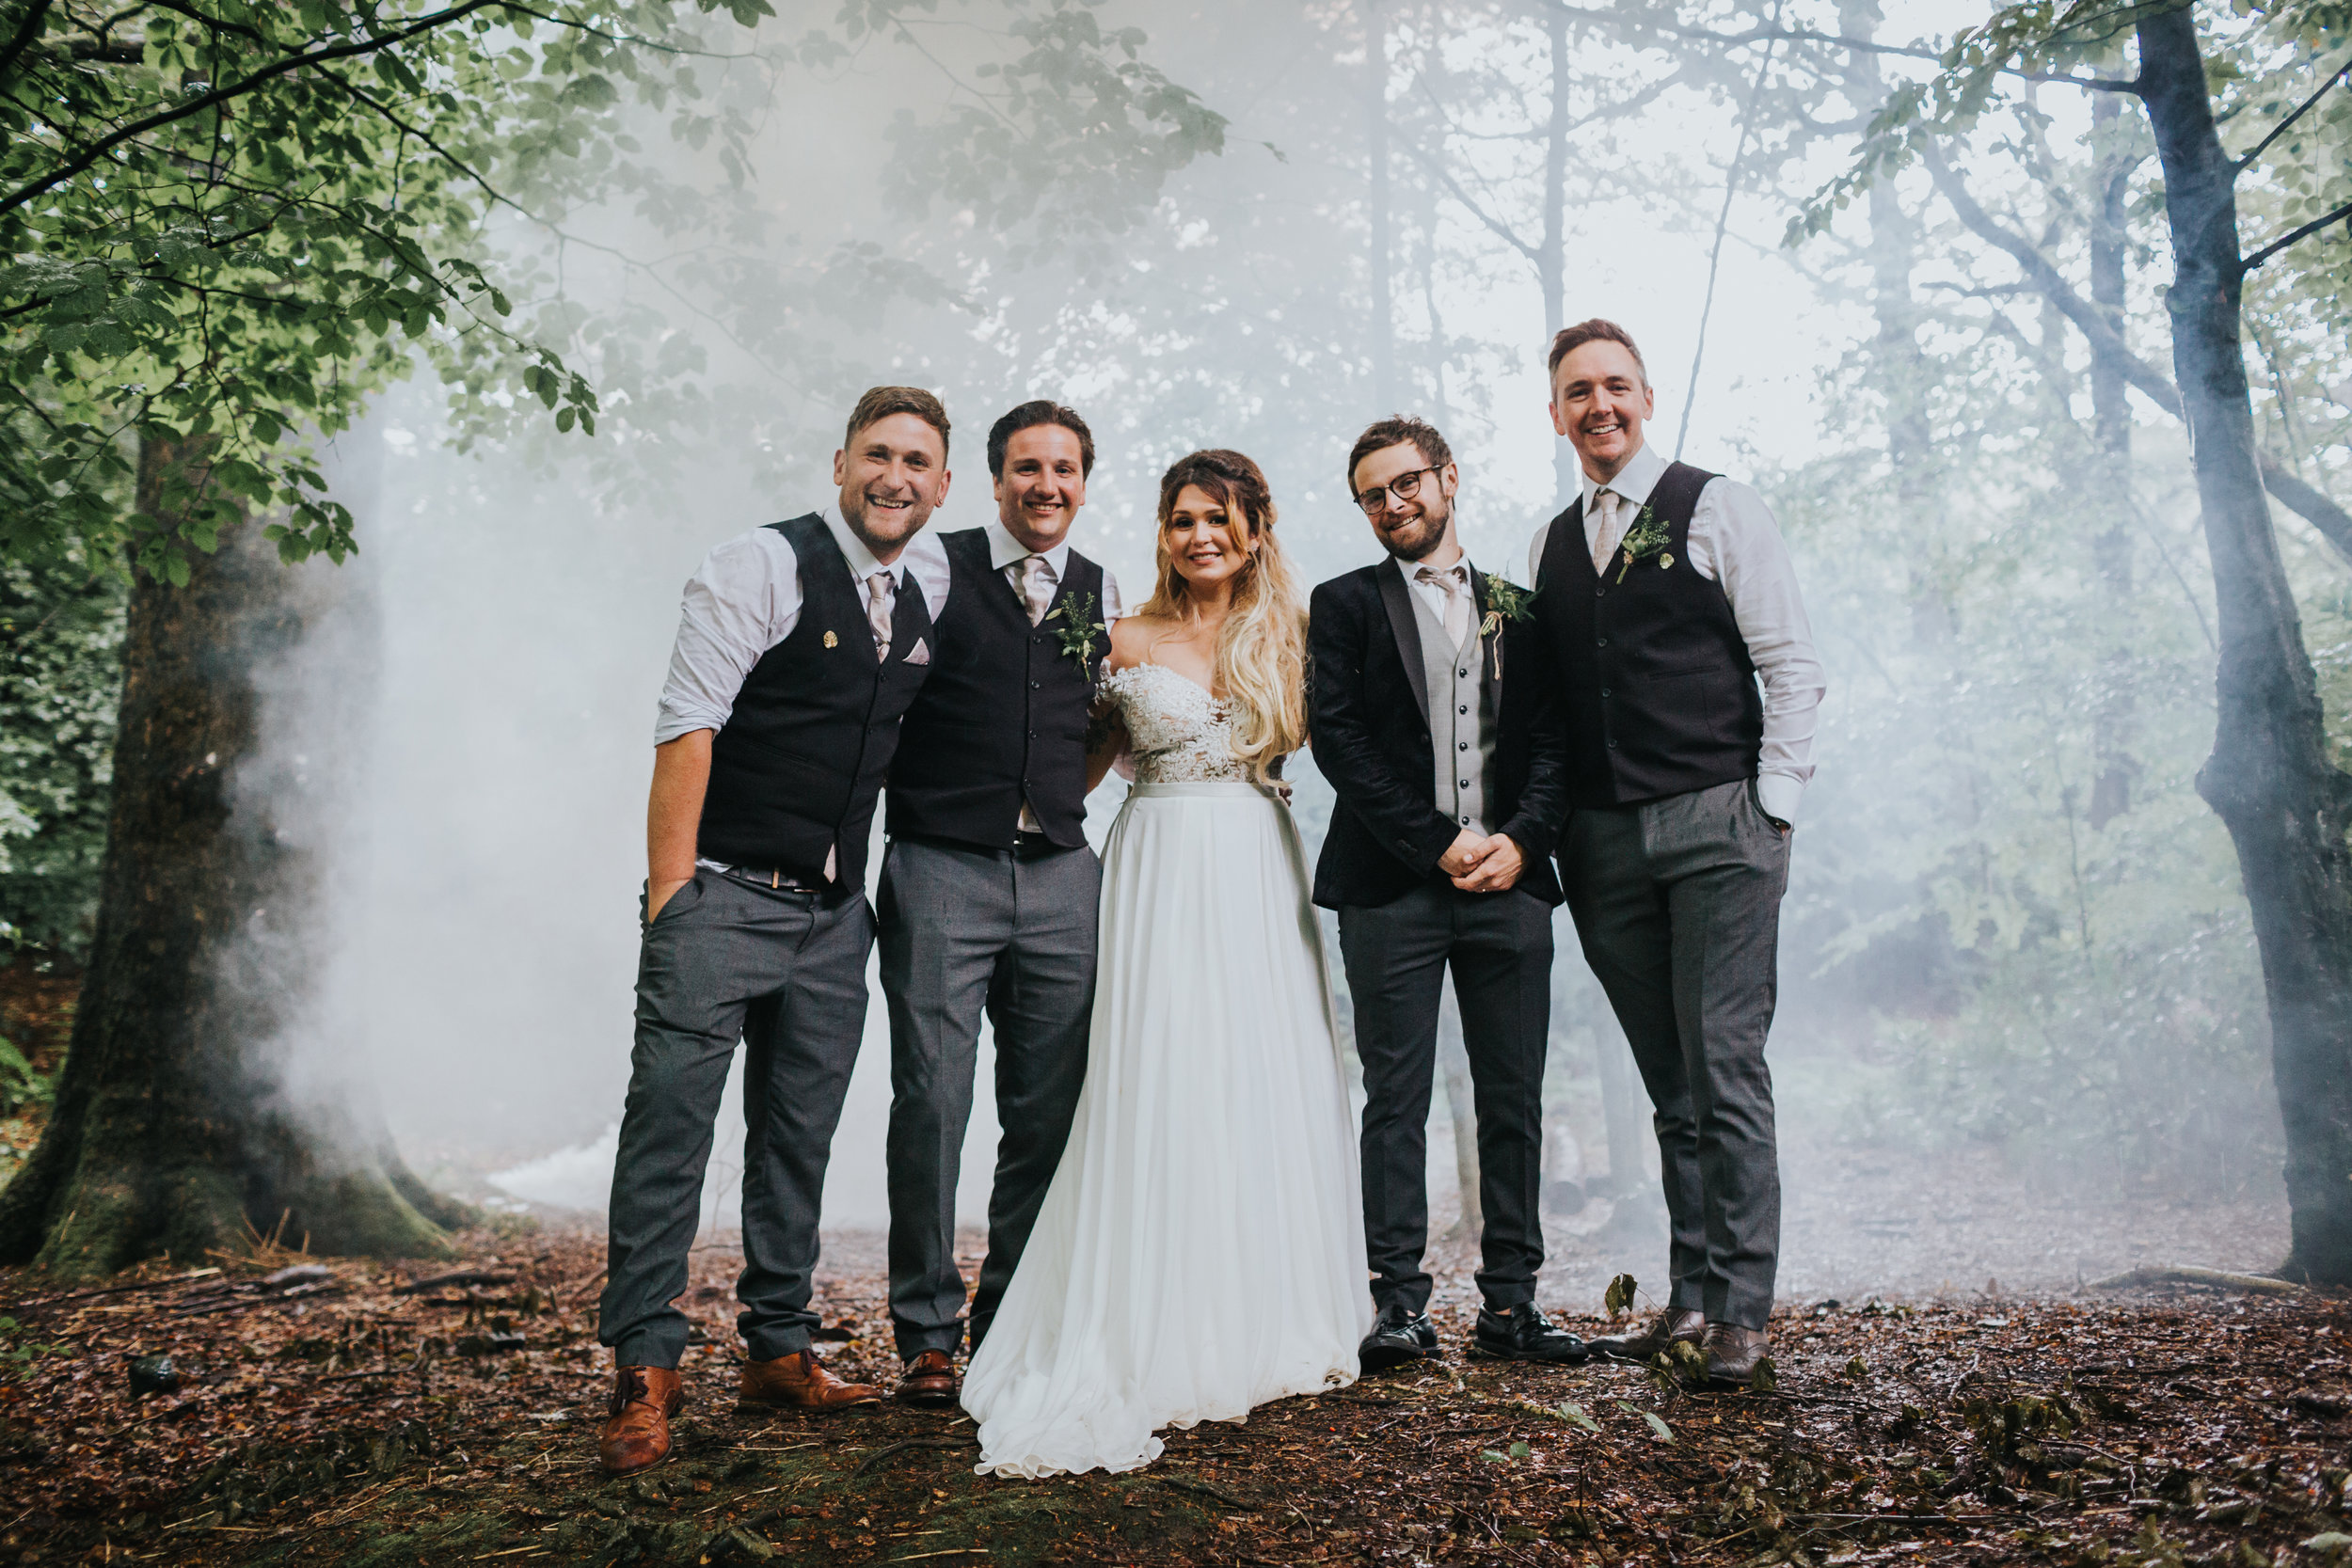 Bride and groom stand with grooms men in front of mist.